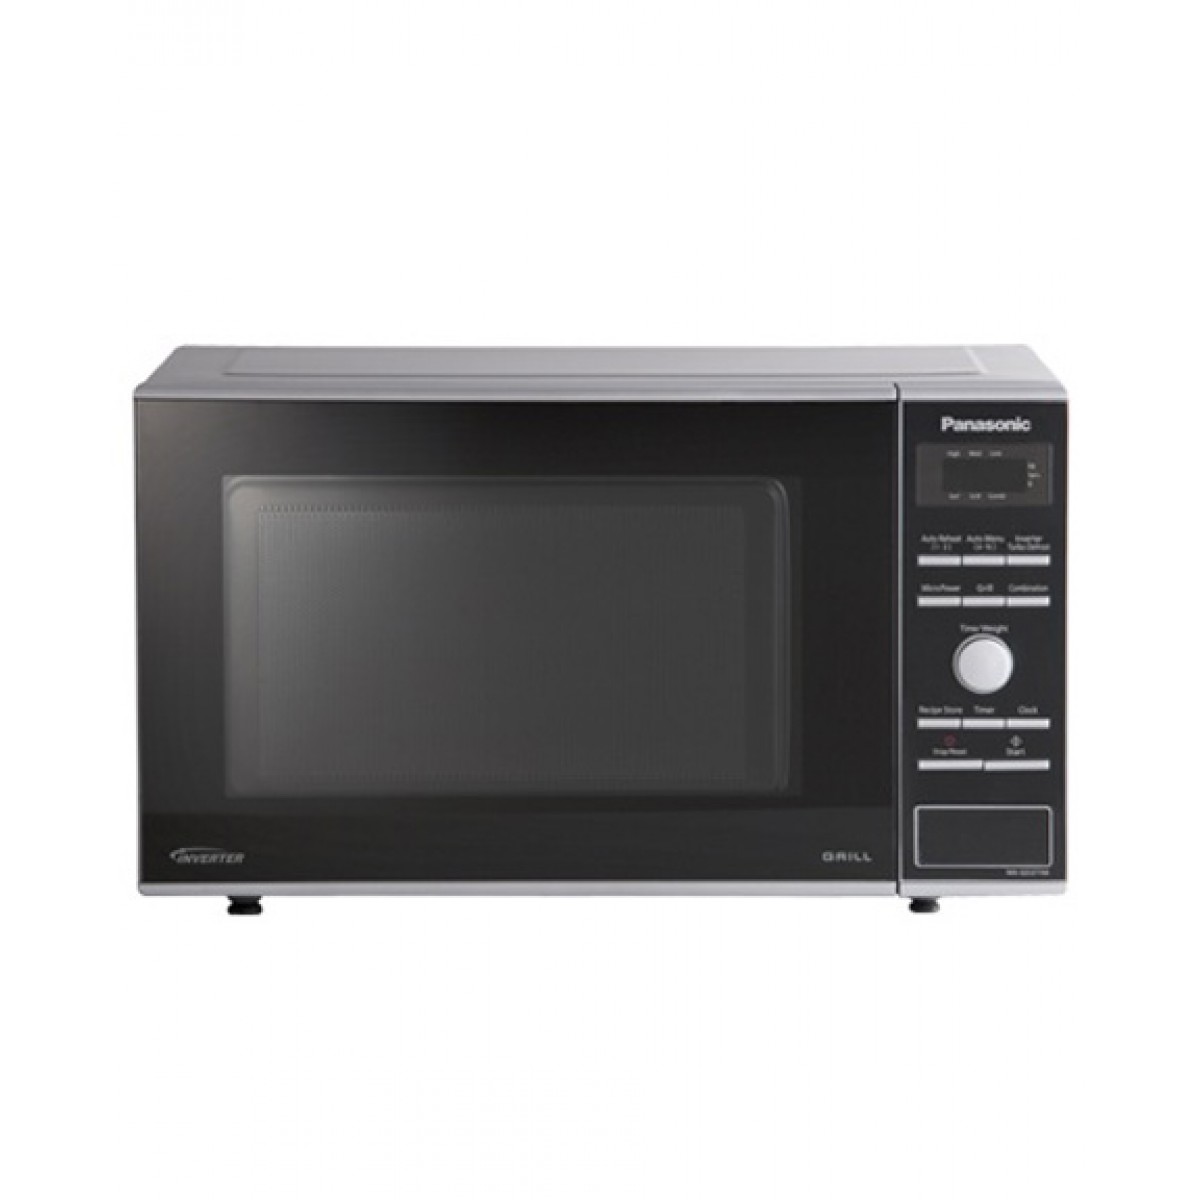 Panasonic Inverter Grill Microwave Oven NN-GD371M best price in bd